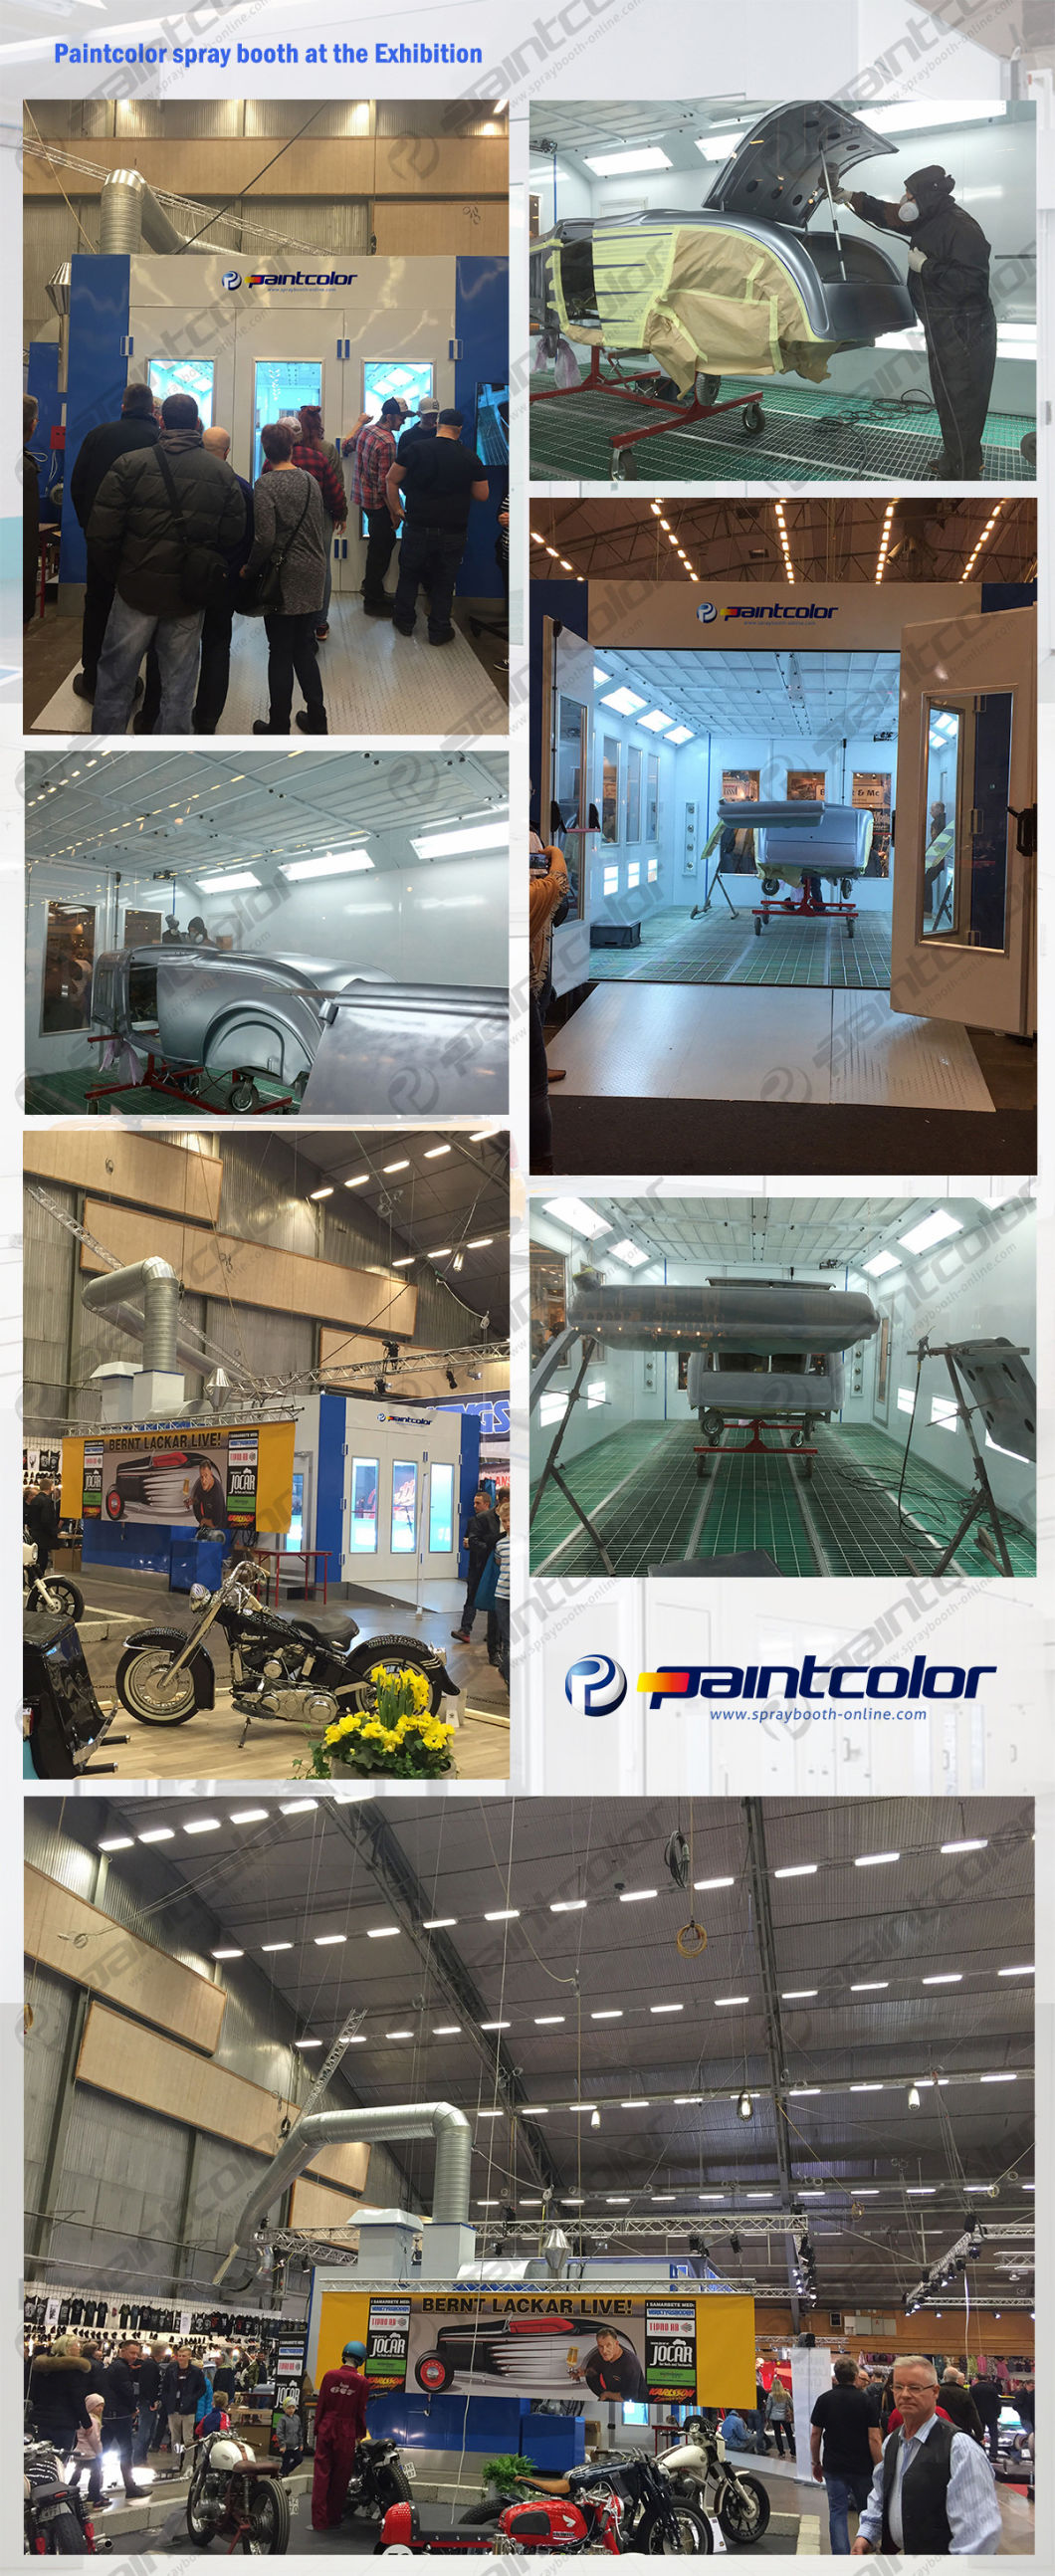 Sheet Metal Line Customized Auto Painting Line Ce Models Combined Paint Oven with Preparation Bays Paintcolor Brand